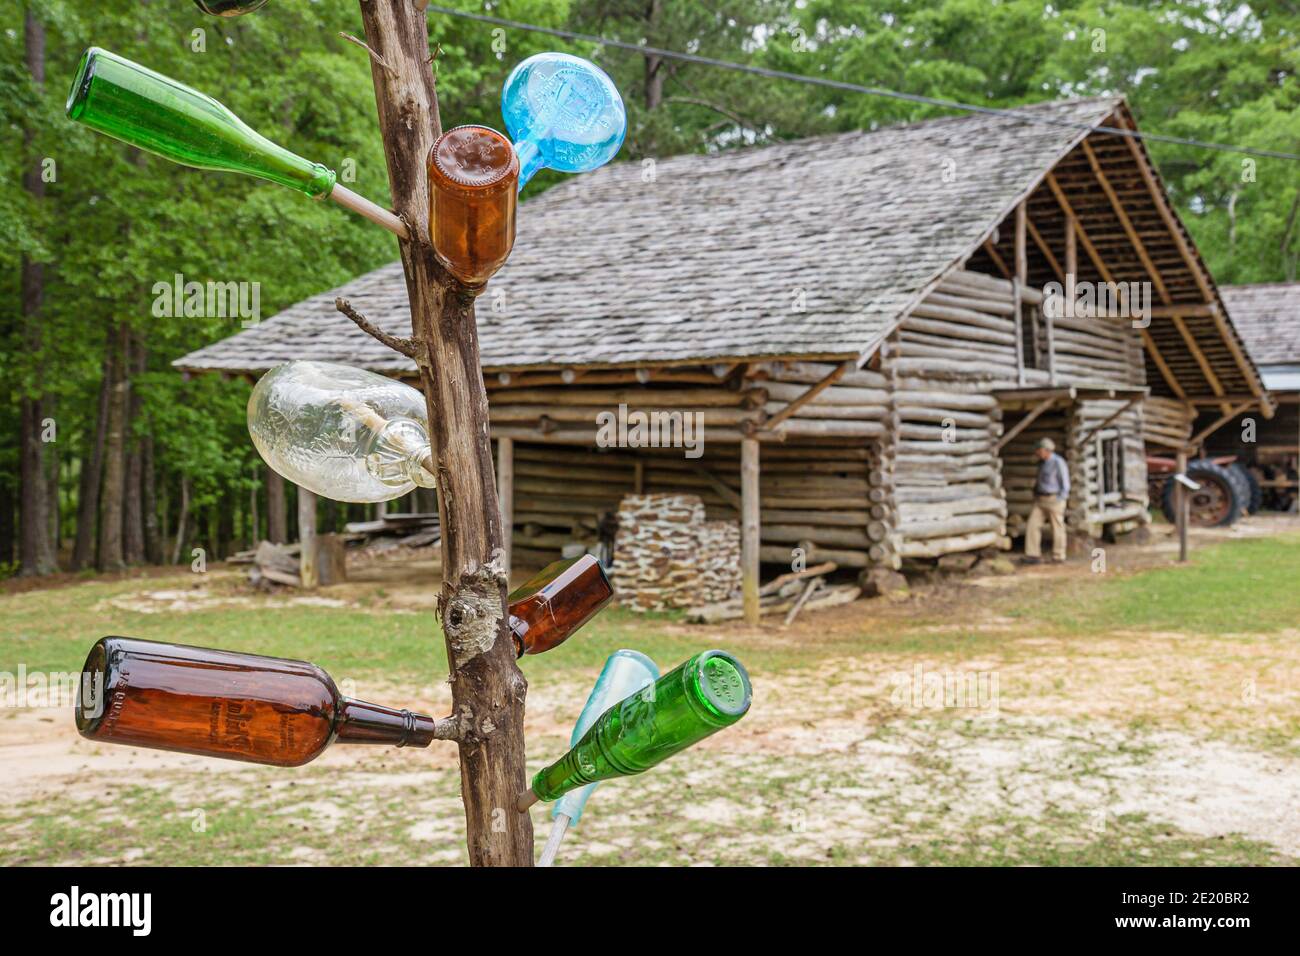 Alabama Troy Pioneer Museum of Alabama bottle tree,Kongo tree altar West African tradition trapped spirits,log barn, Stock Photo